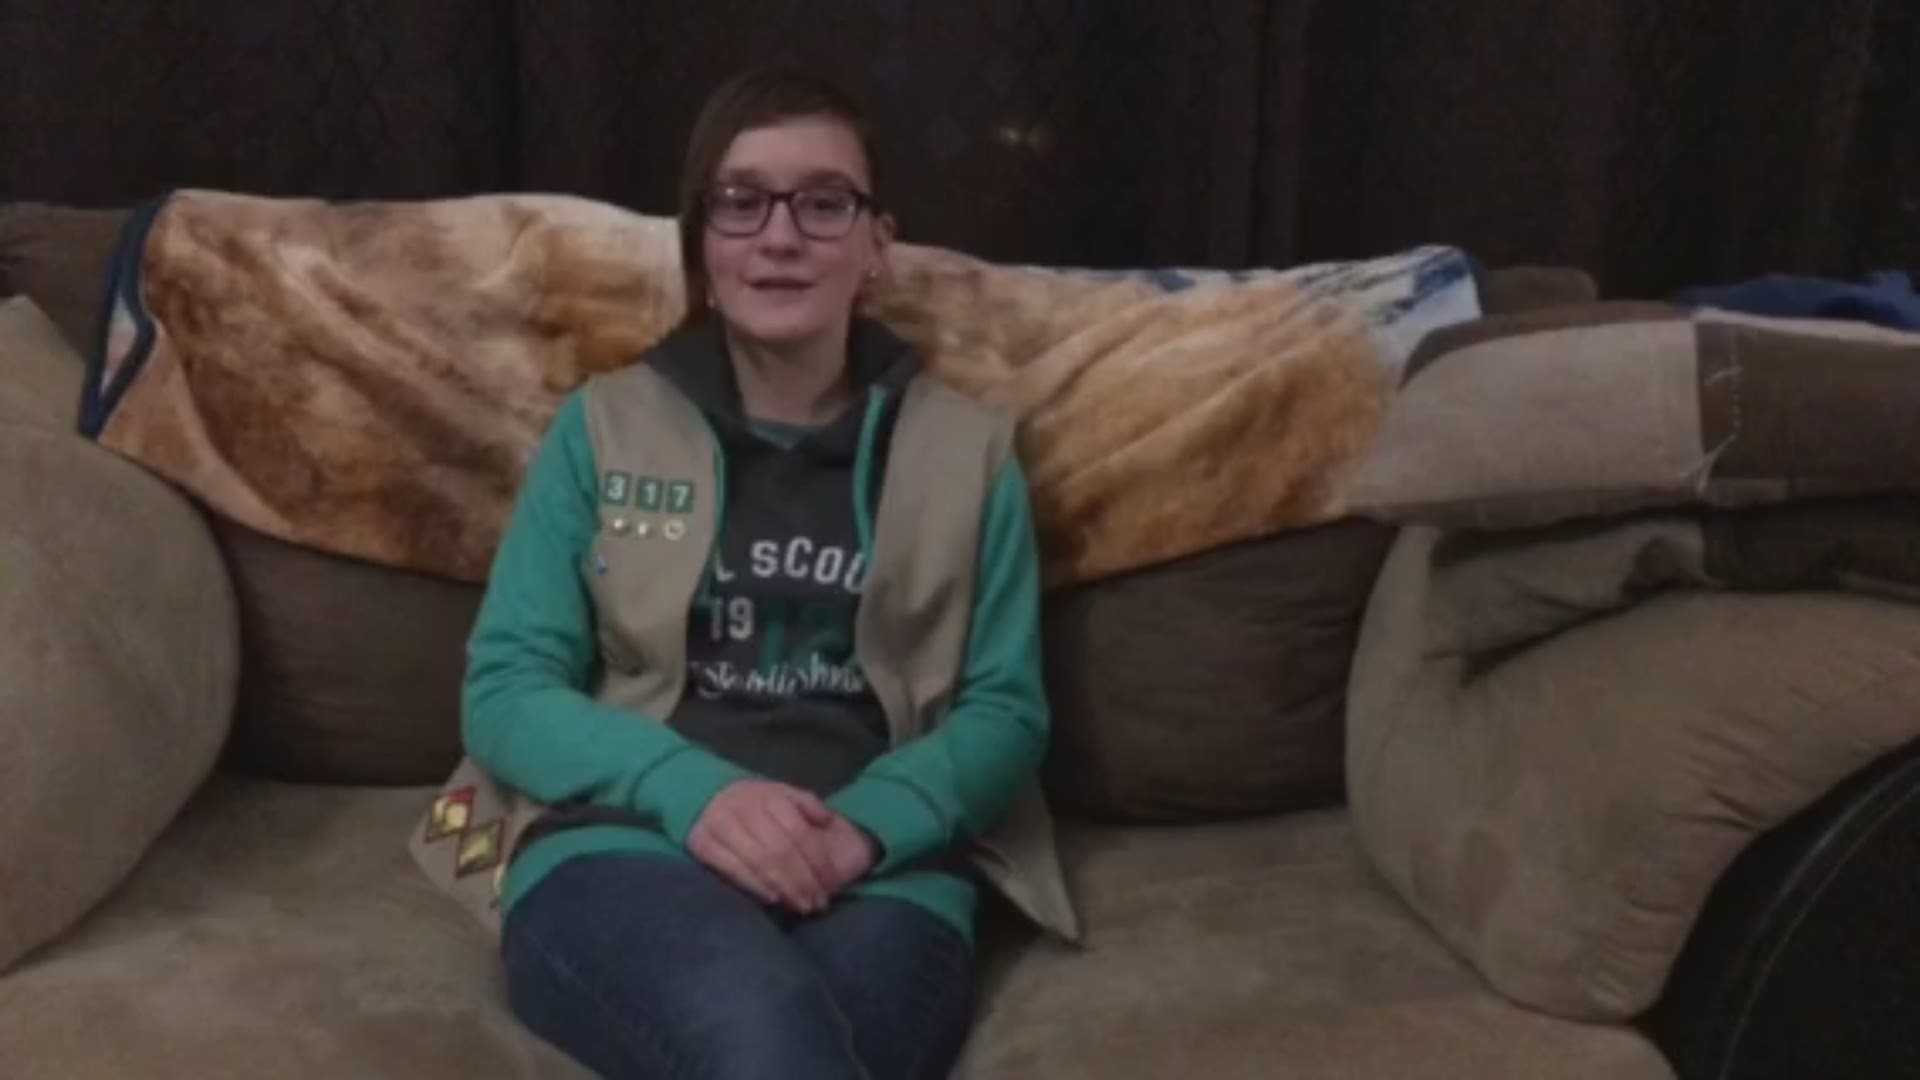 Kaidance Miller hopes to donate 3,000 boxes of Girl Scout cookies to U.S. troops this year. (Video courtesy of Kaidance's mother Liz)